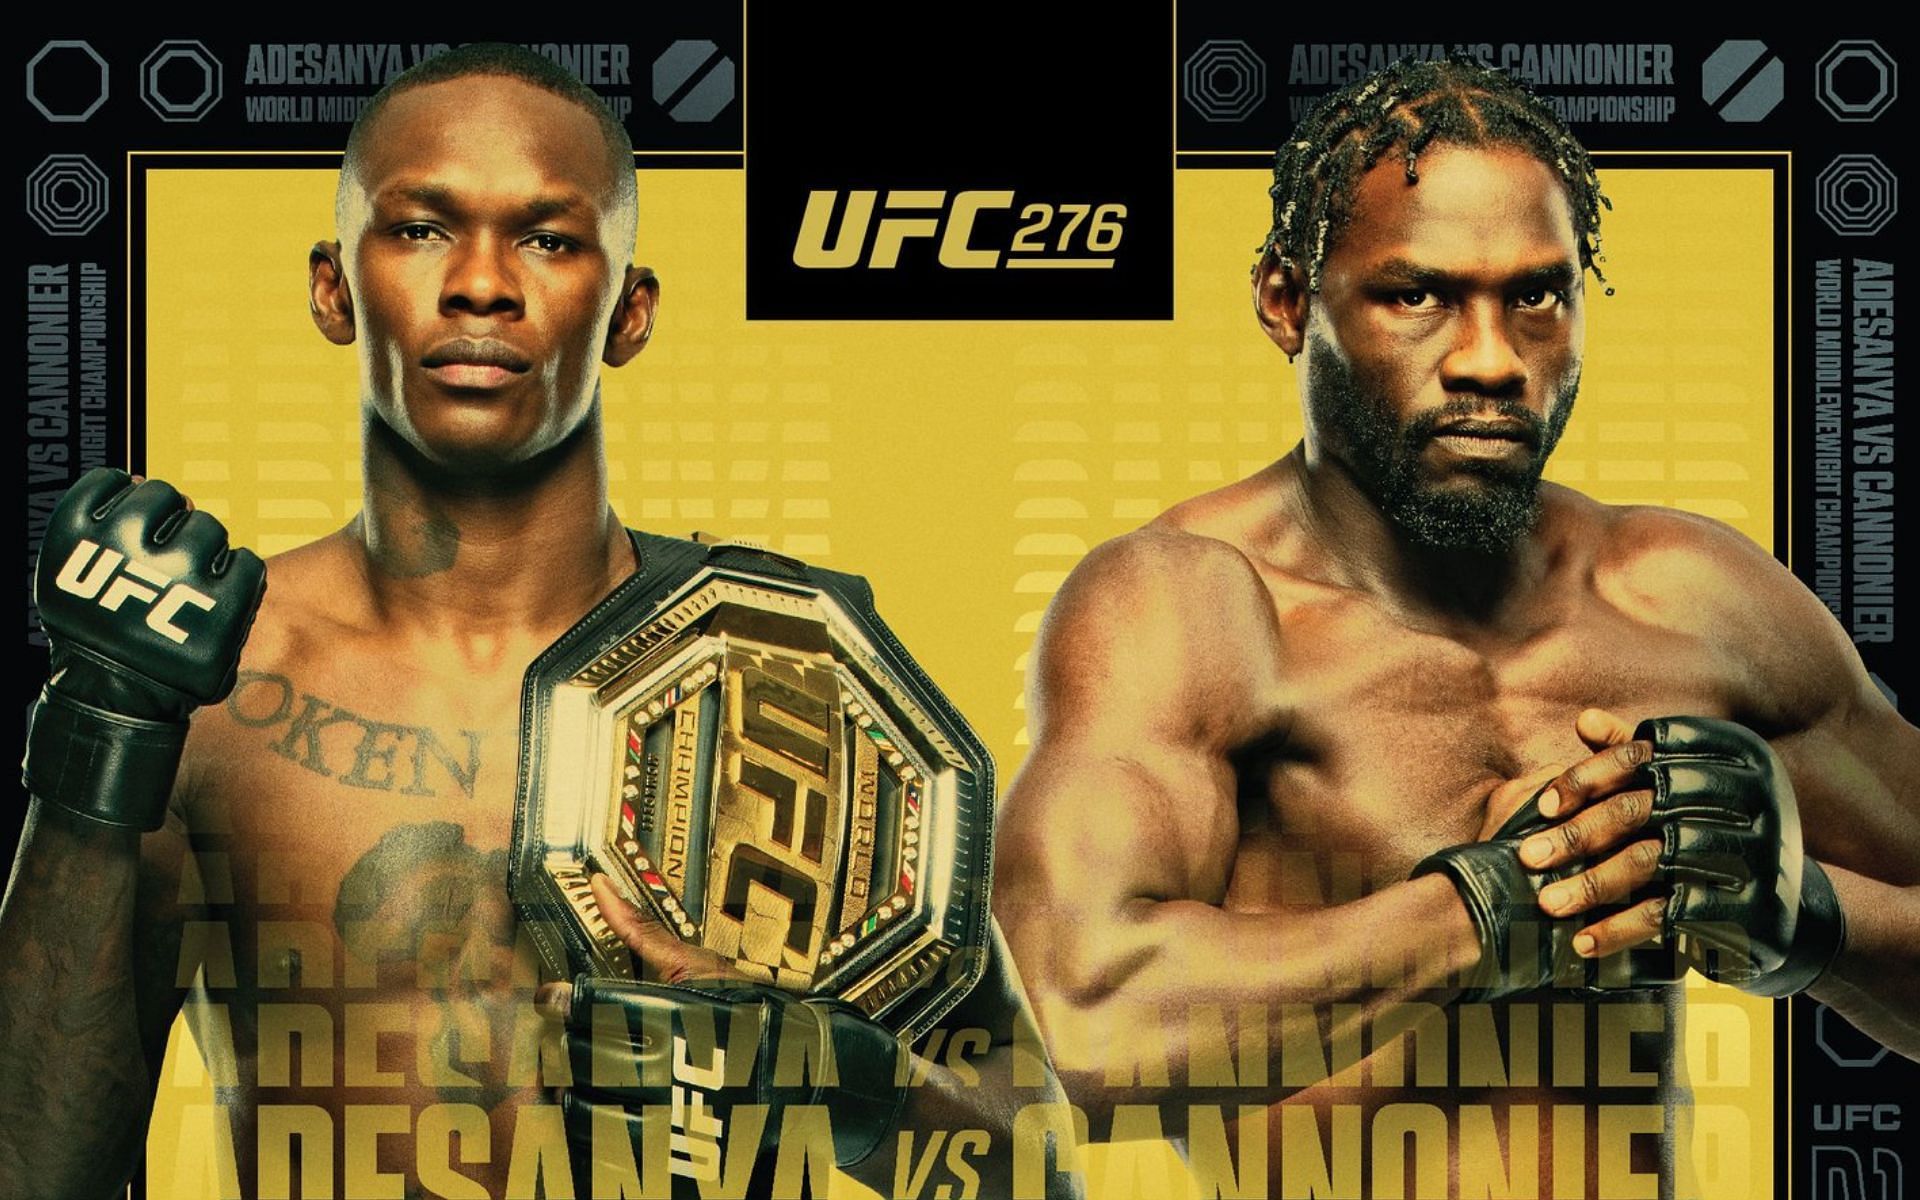 Official Poster of UFC 276 featuring Israel Adesanya (L) and Jared Cannonier (R). [Image via. @ufc on instagram]